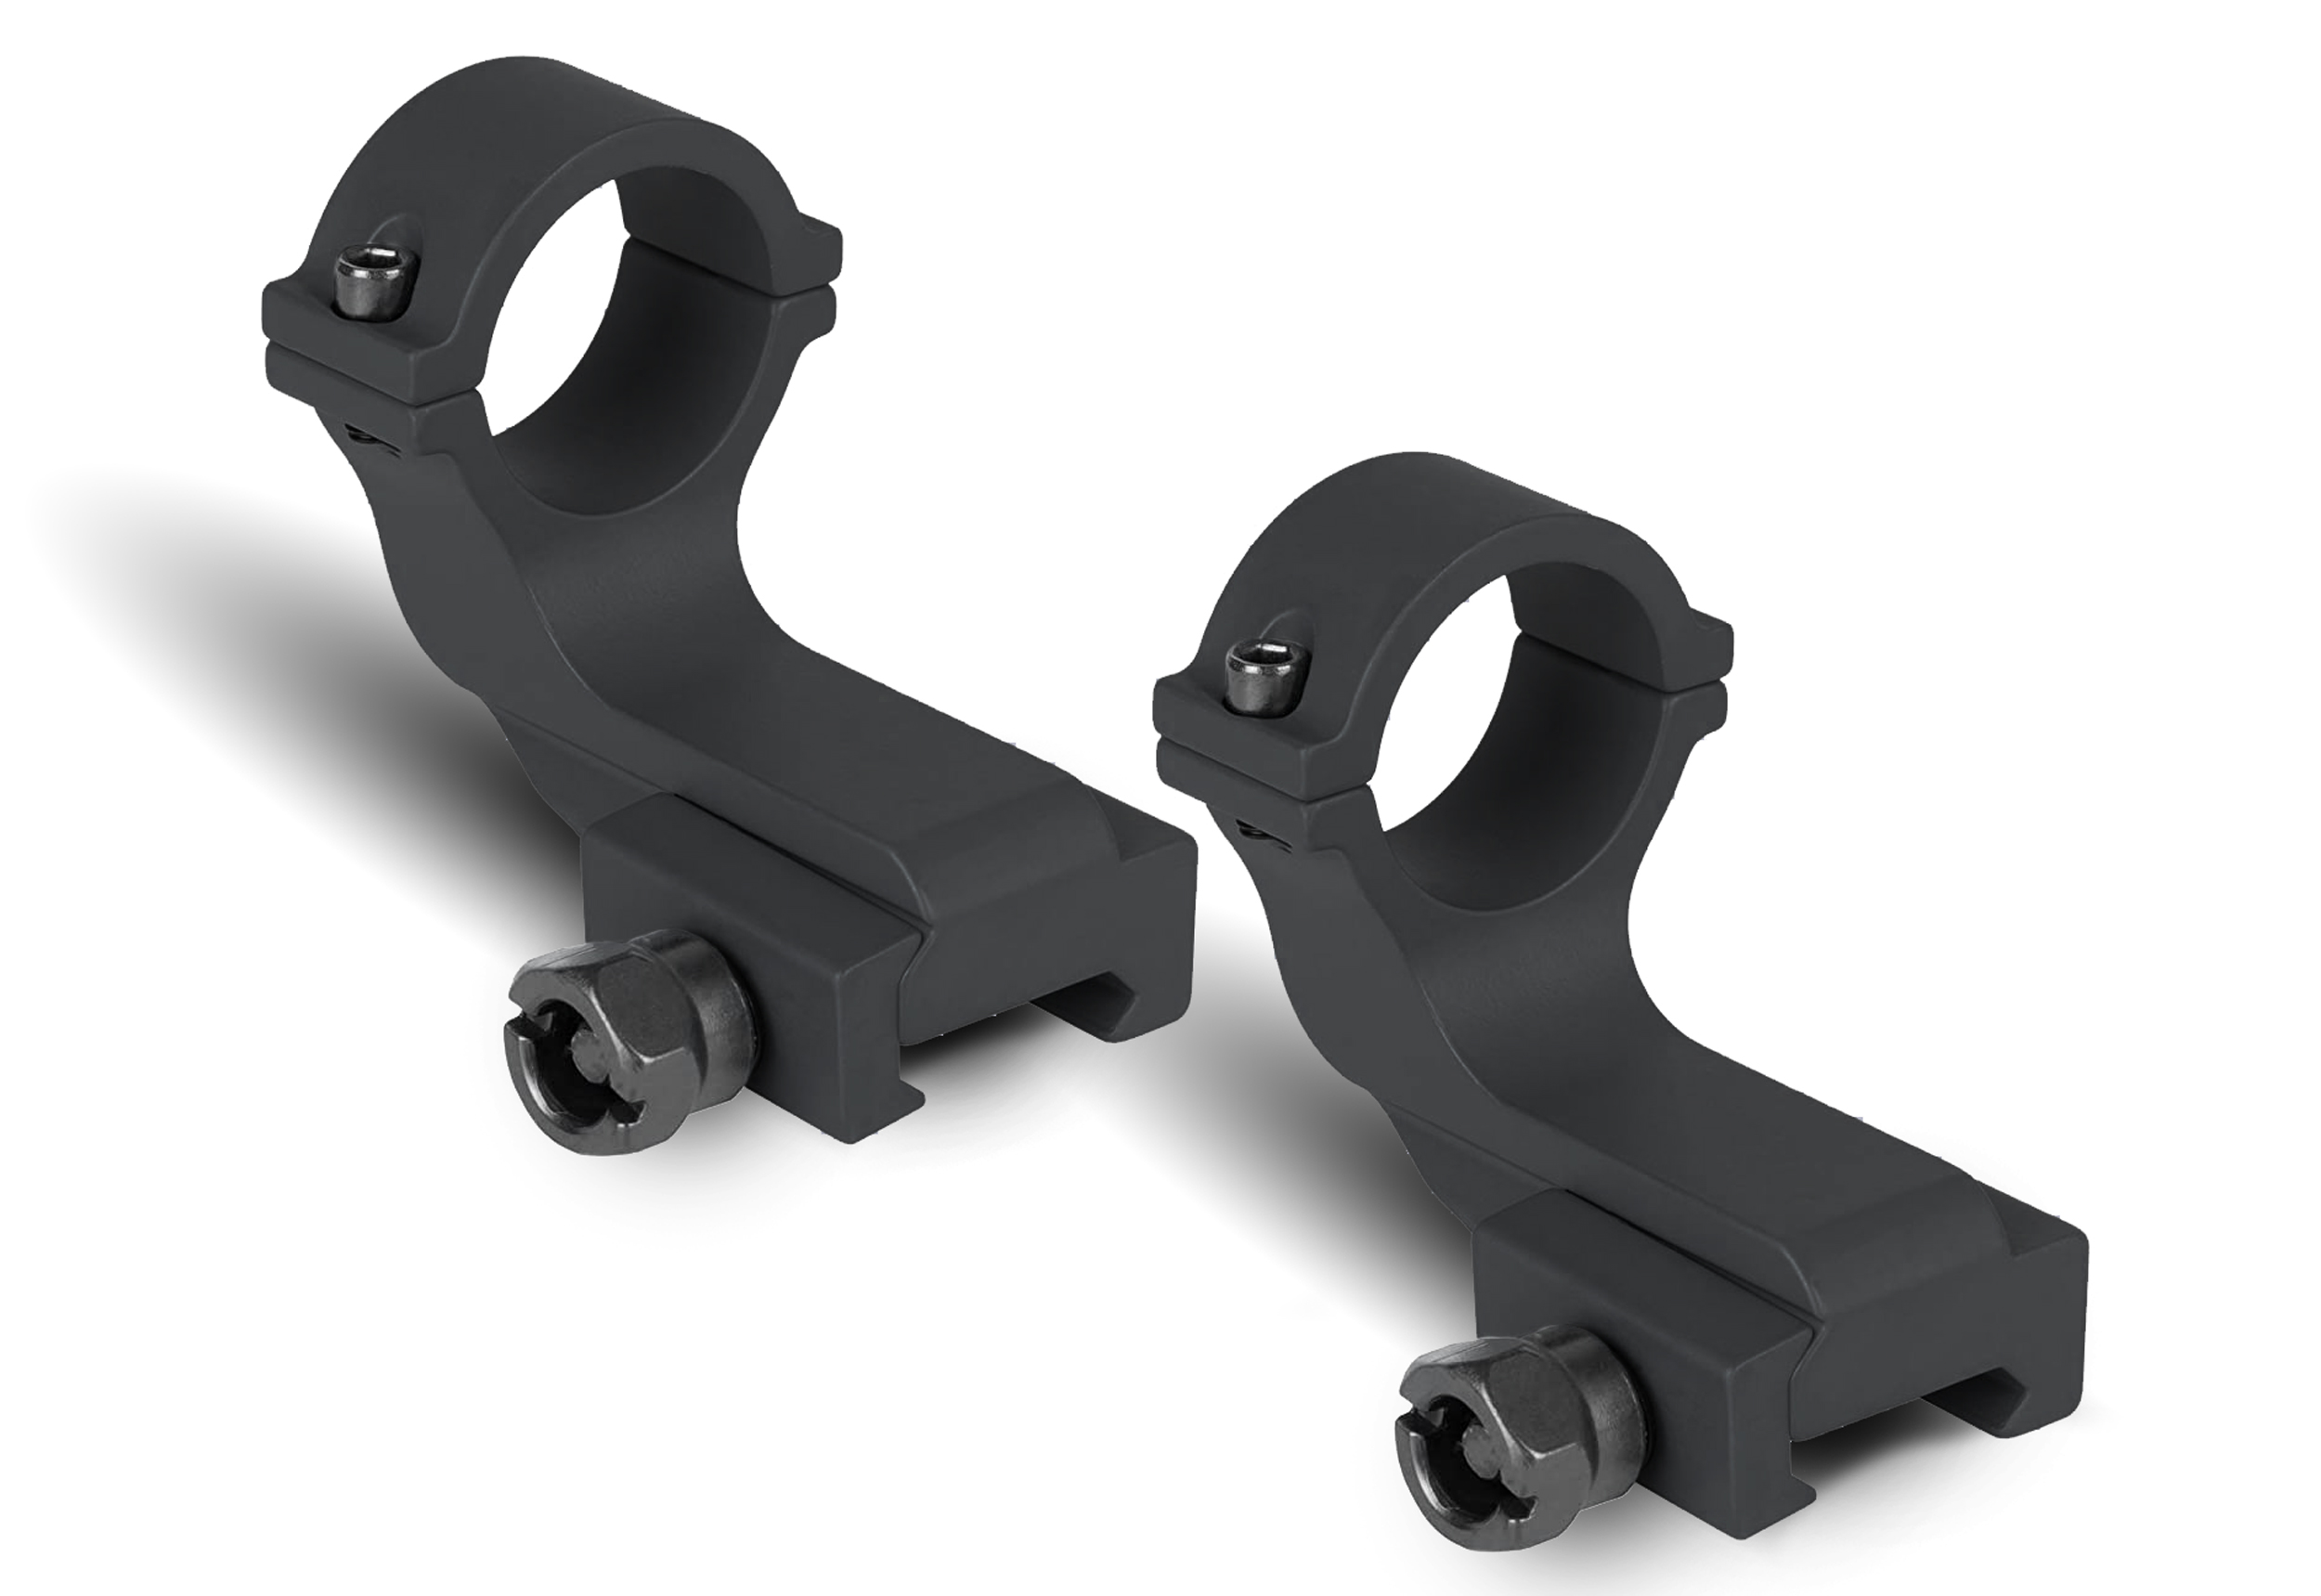 Offset Reversible 30 mm Rifle Scope Rings, Picatinny Rail Mount Questions & Answers